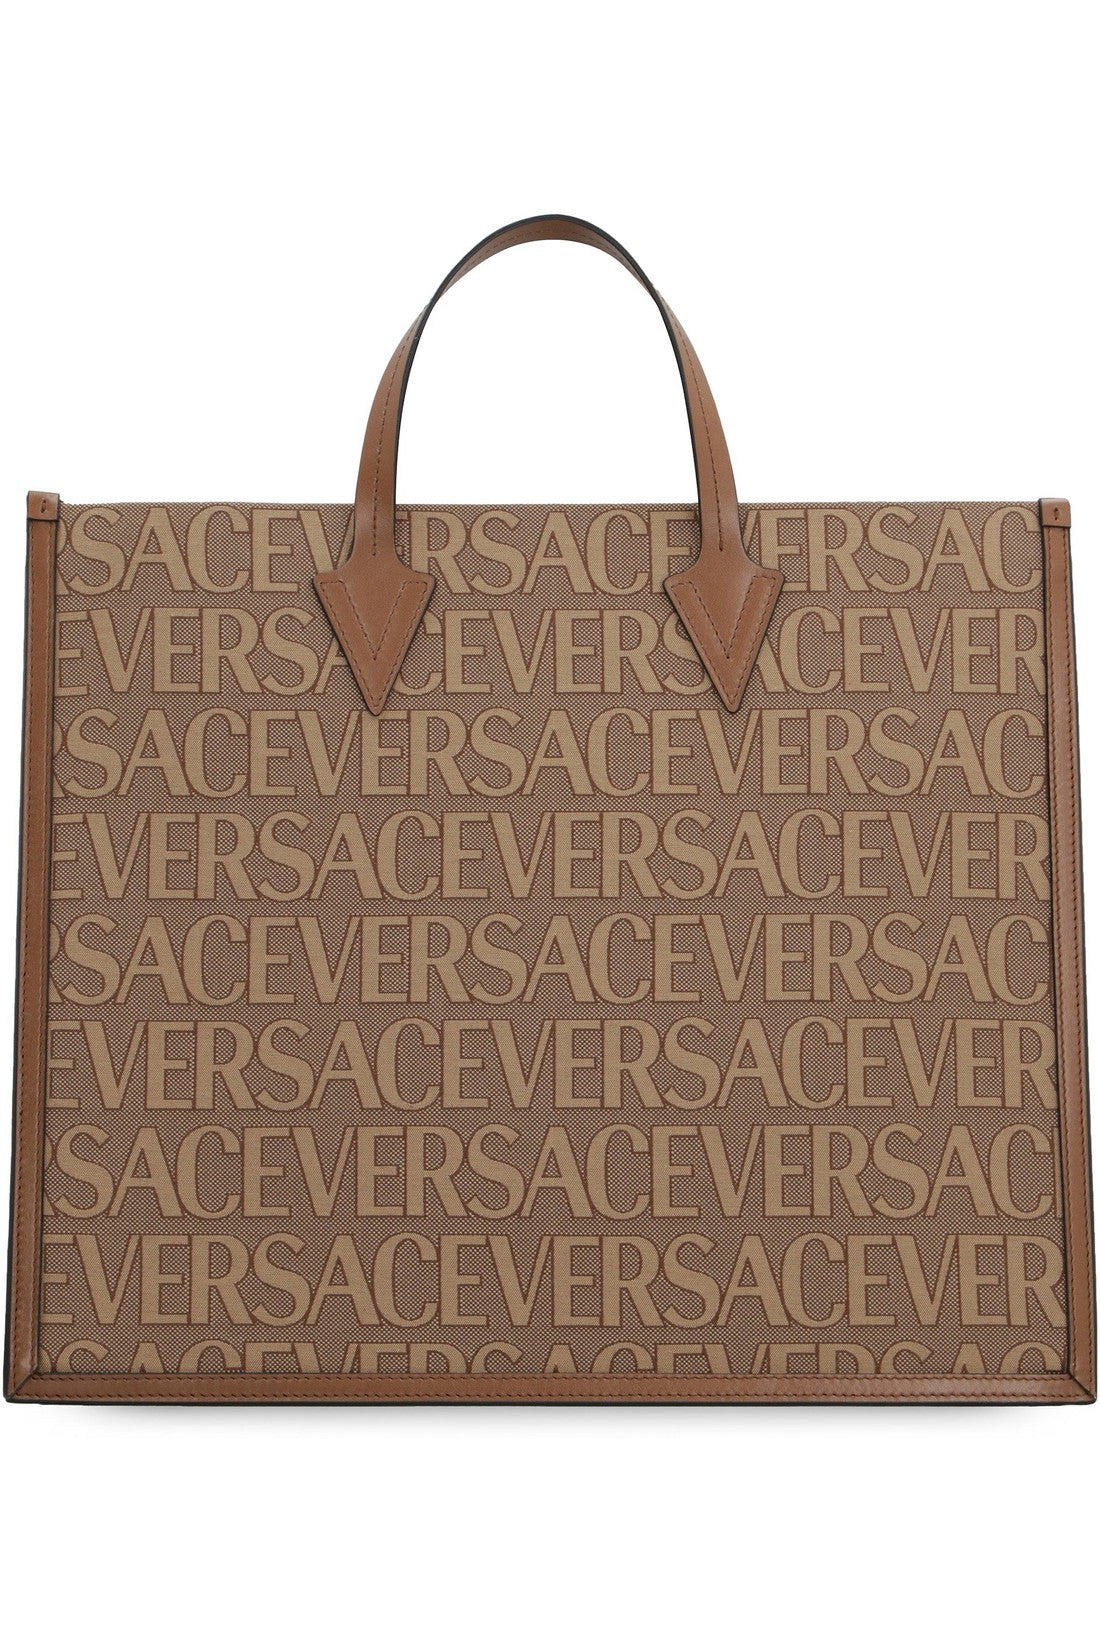 Versace-OUTLET-SALE-Canvas and leather shopping bag-ARCHIVIST